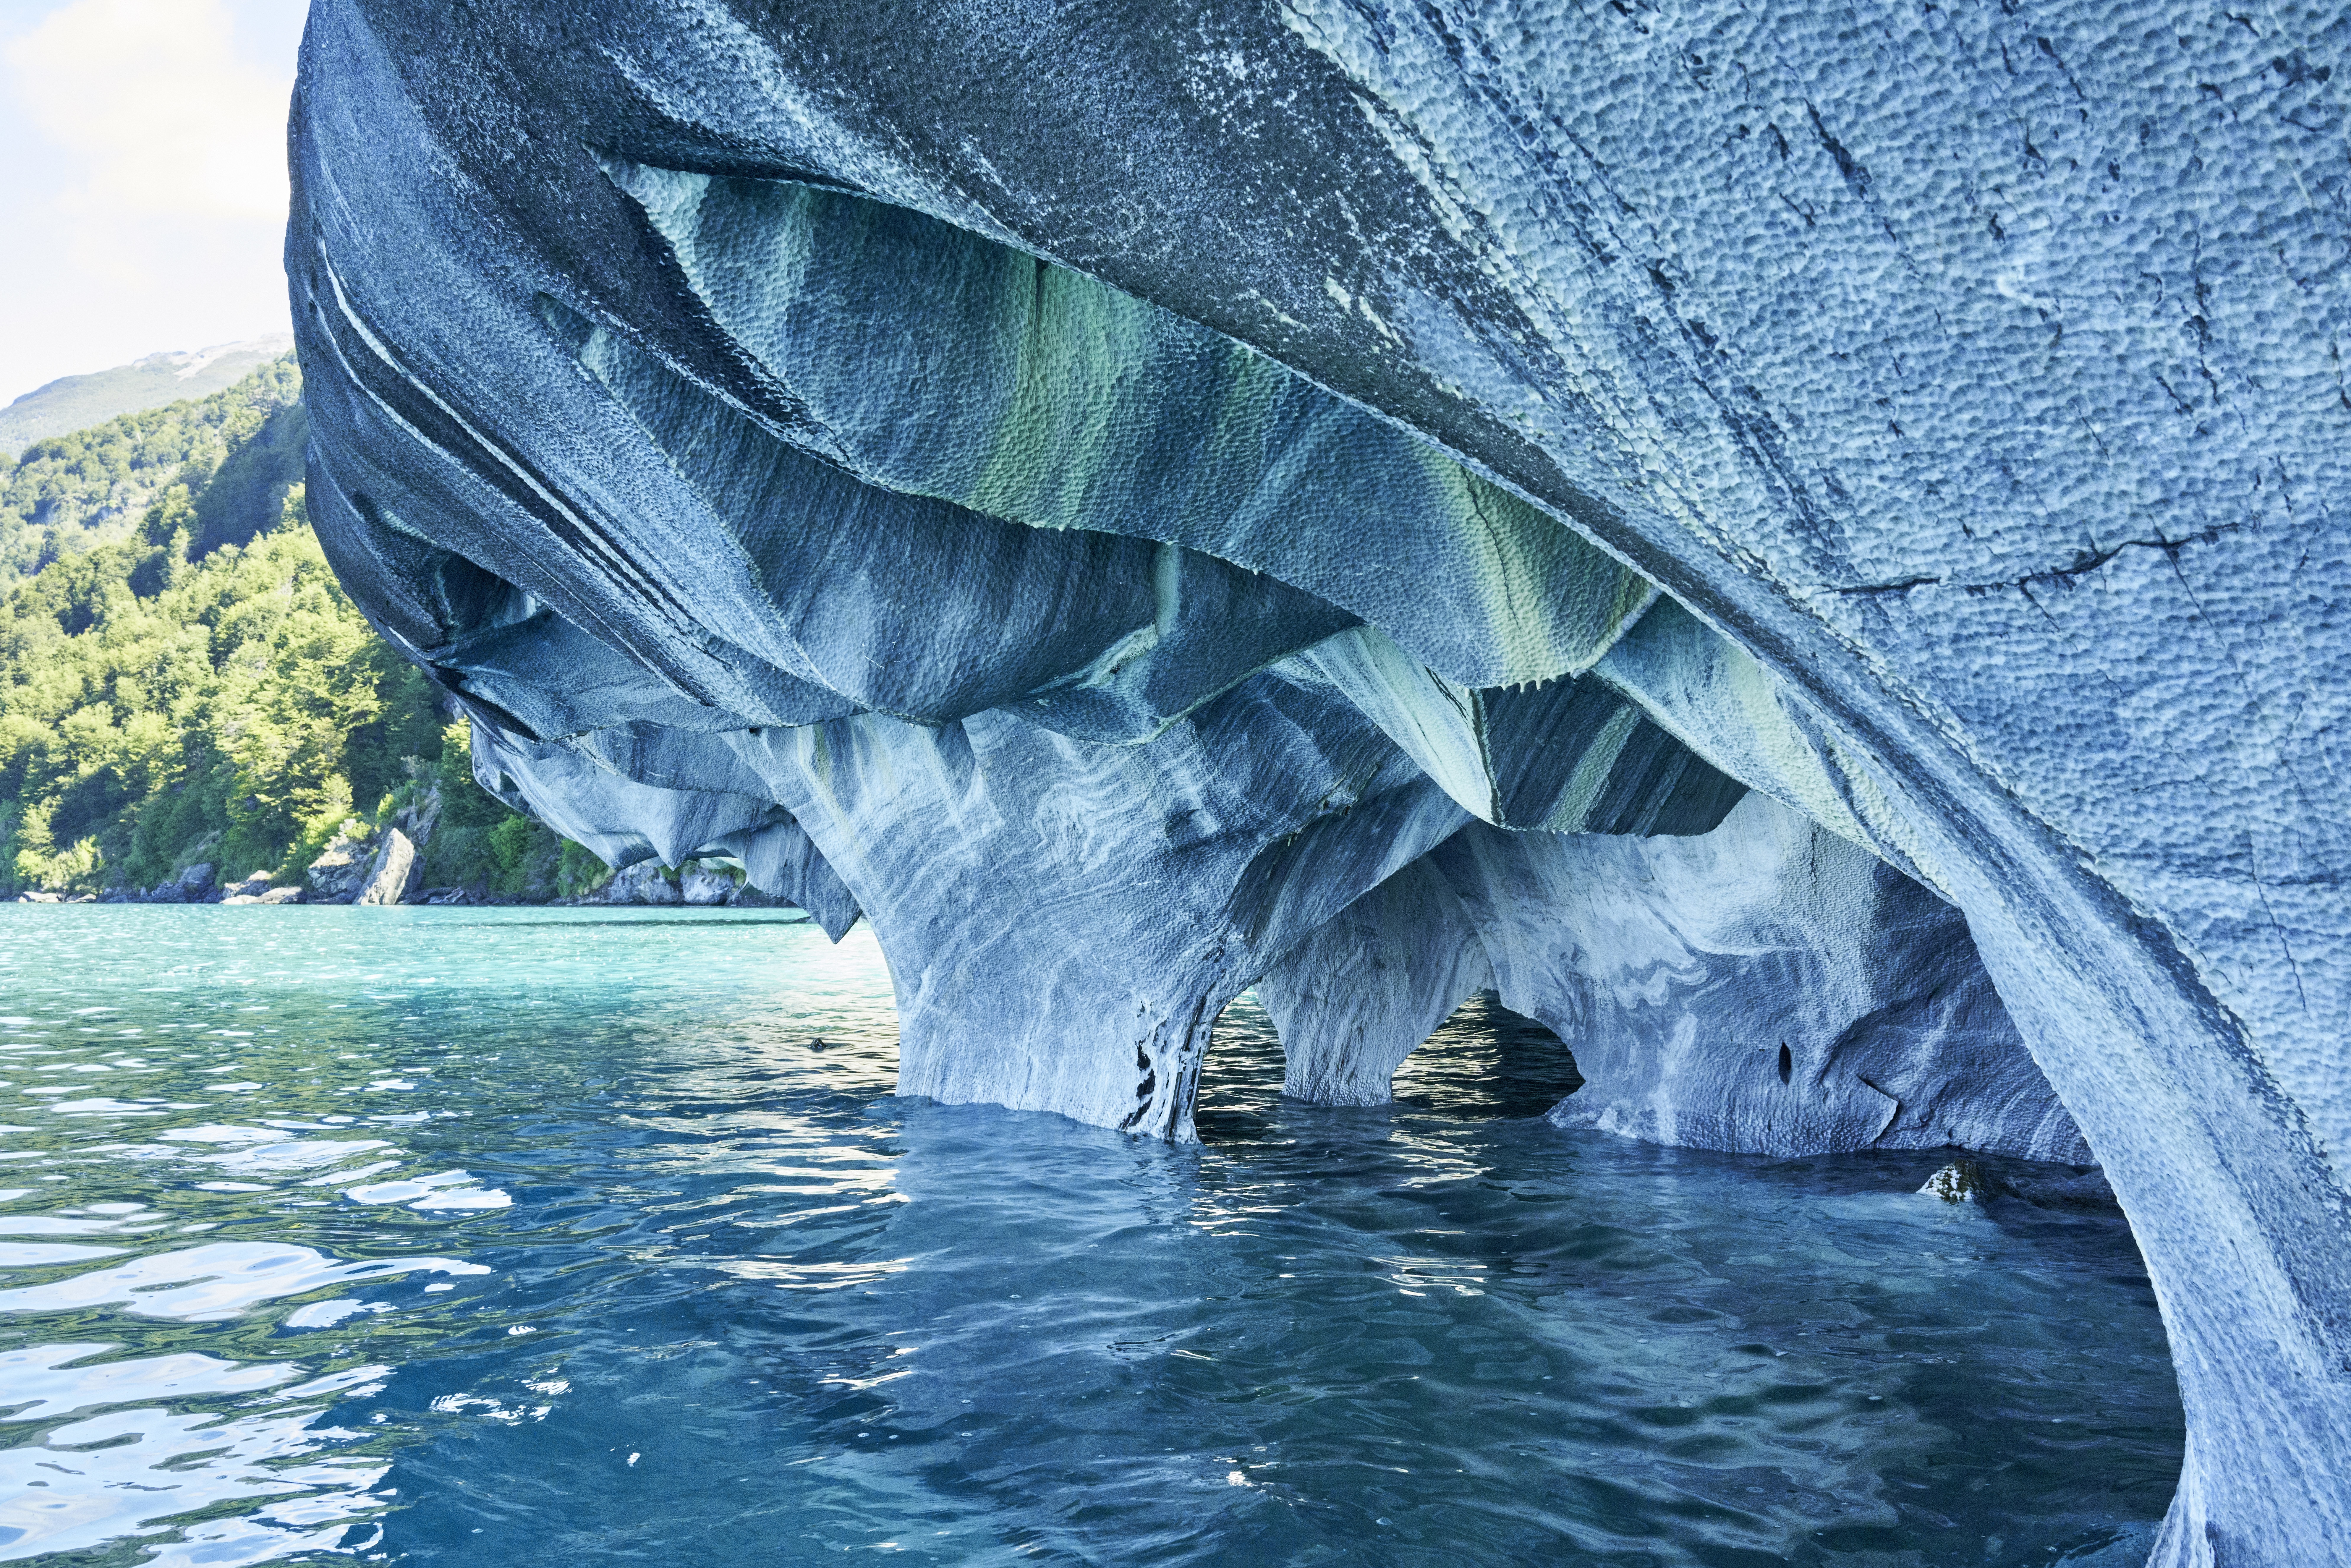 Magical Wonders to See During a Family Vacation - Marble Caves in Chile